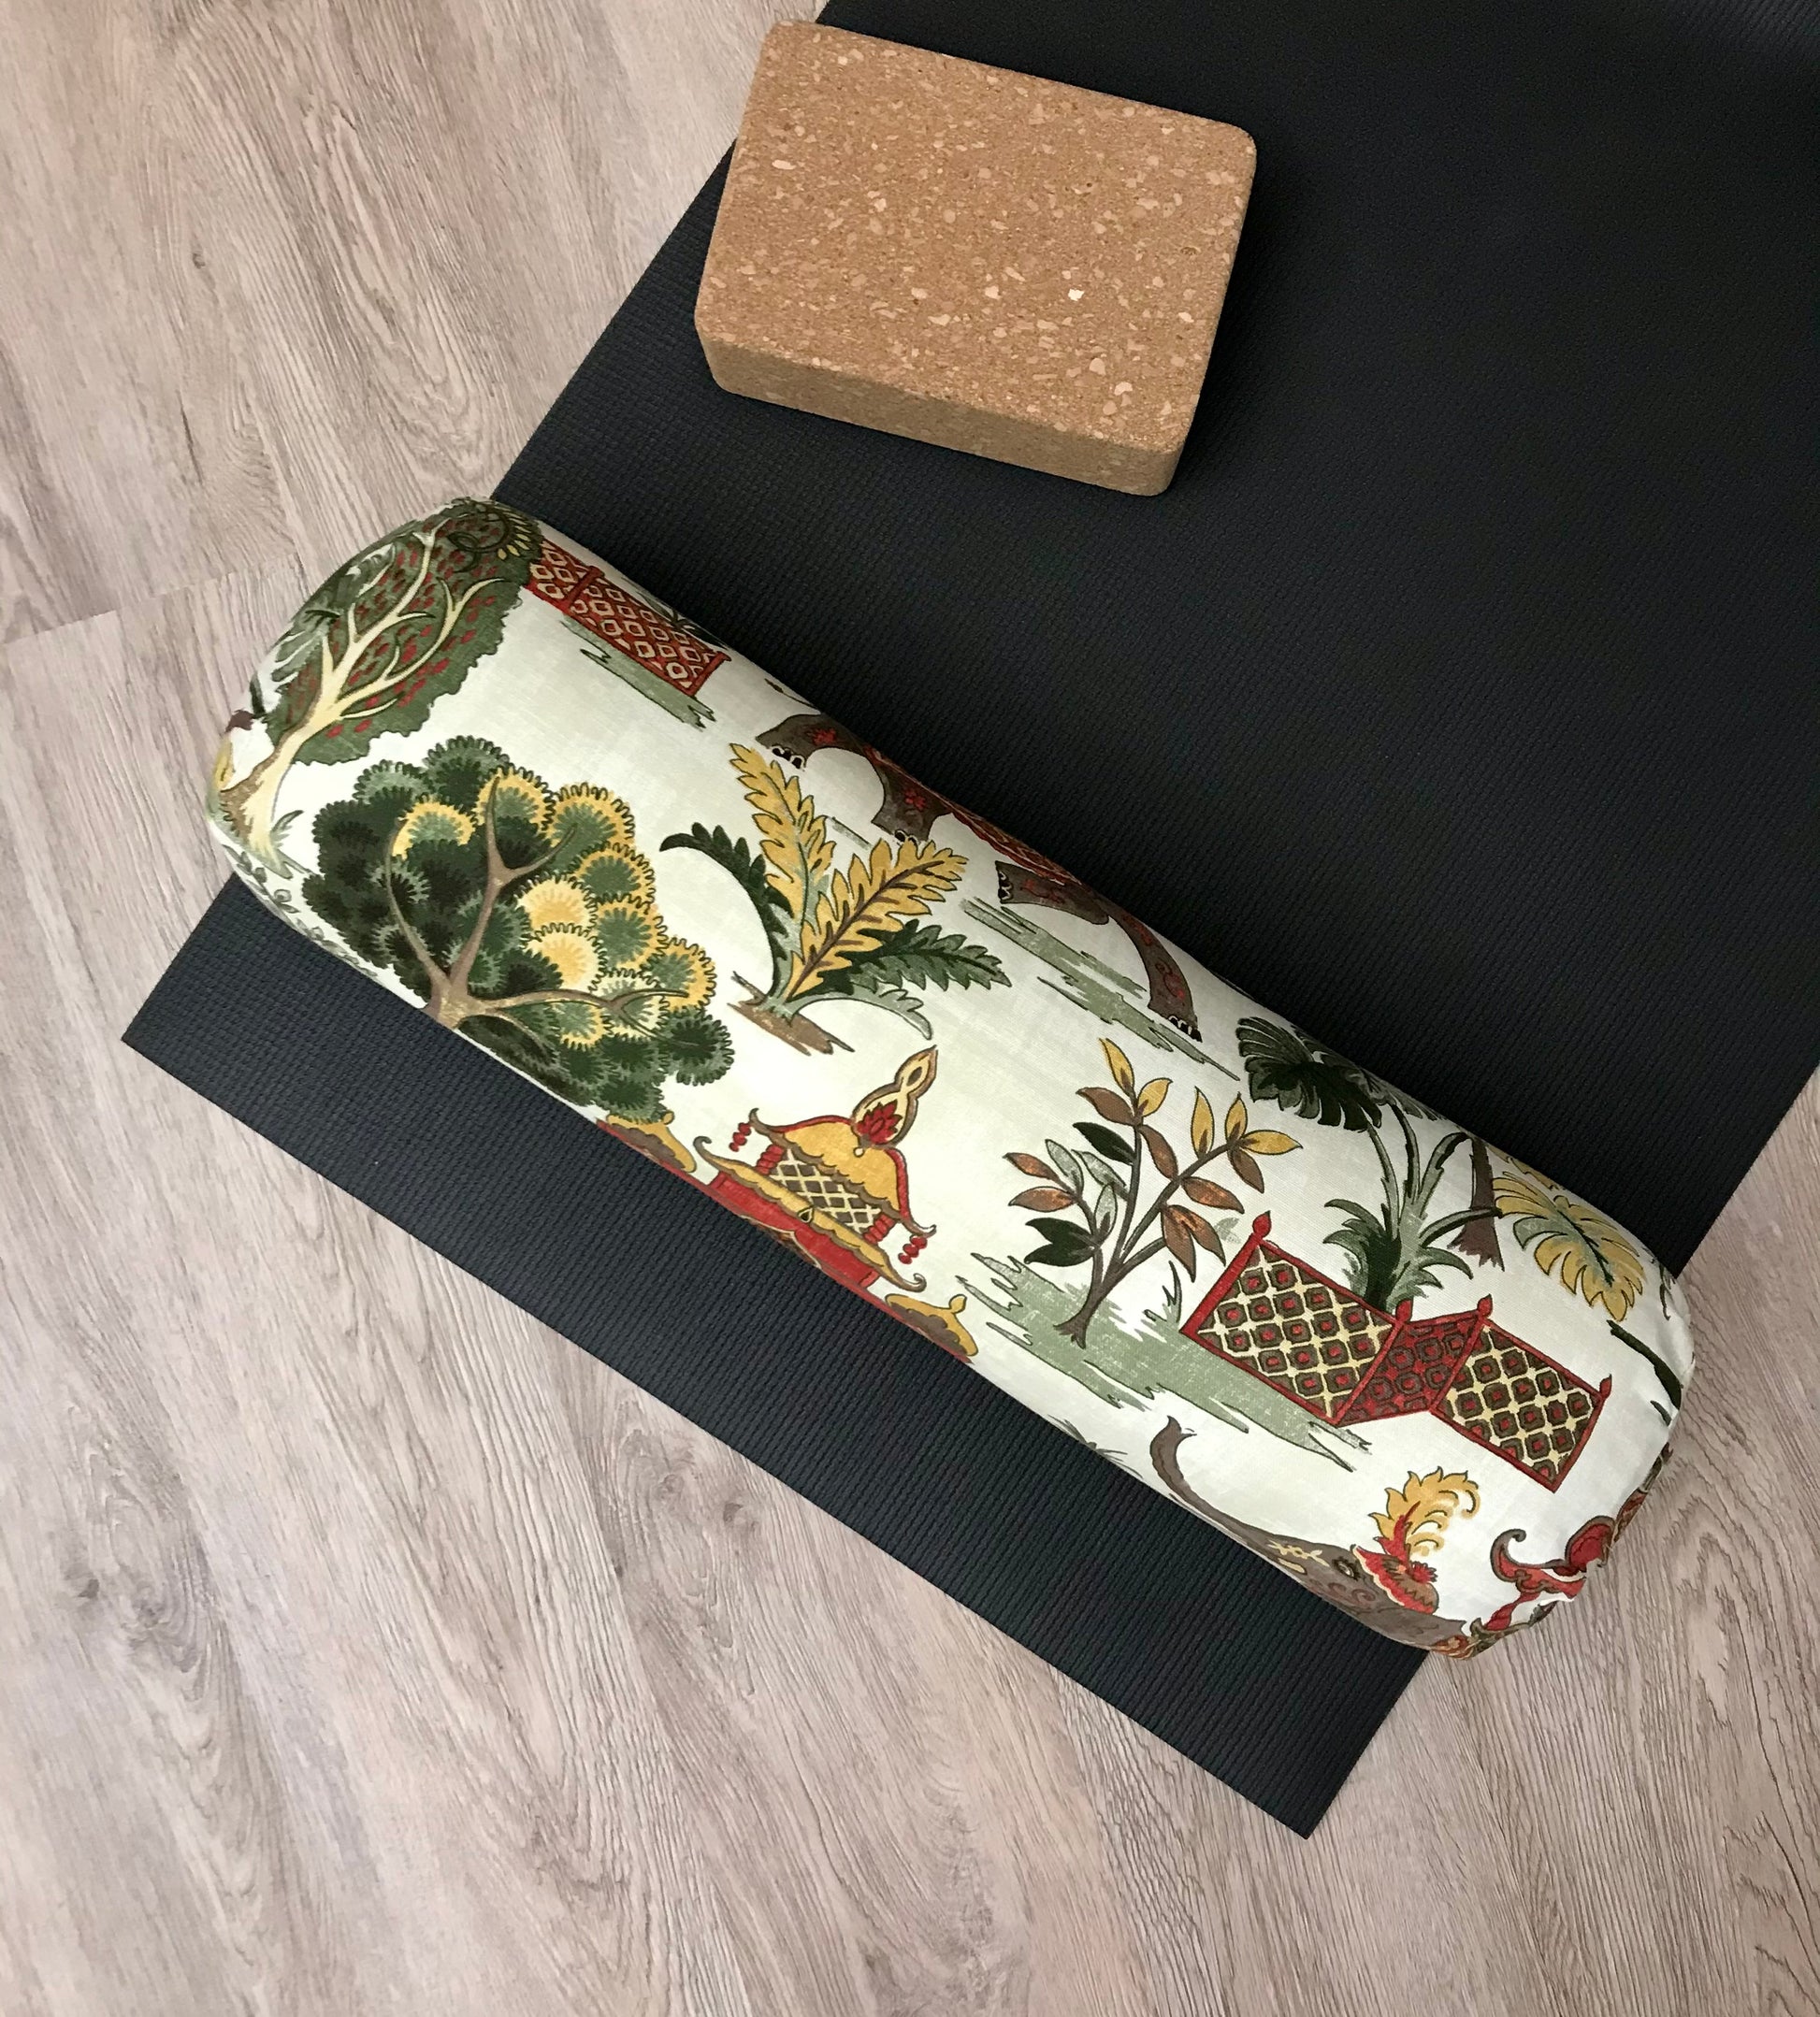 Round yoga bolster in cotton canvas, novelty fabric with India images fabric. Allergy conscious fill with removeable cover. Made in Canada by My Yoga Room Elements